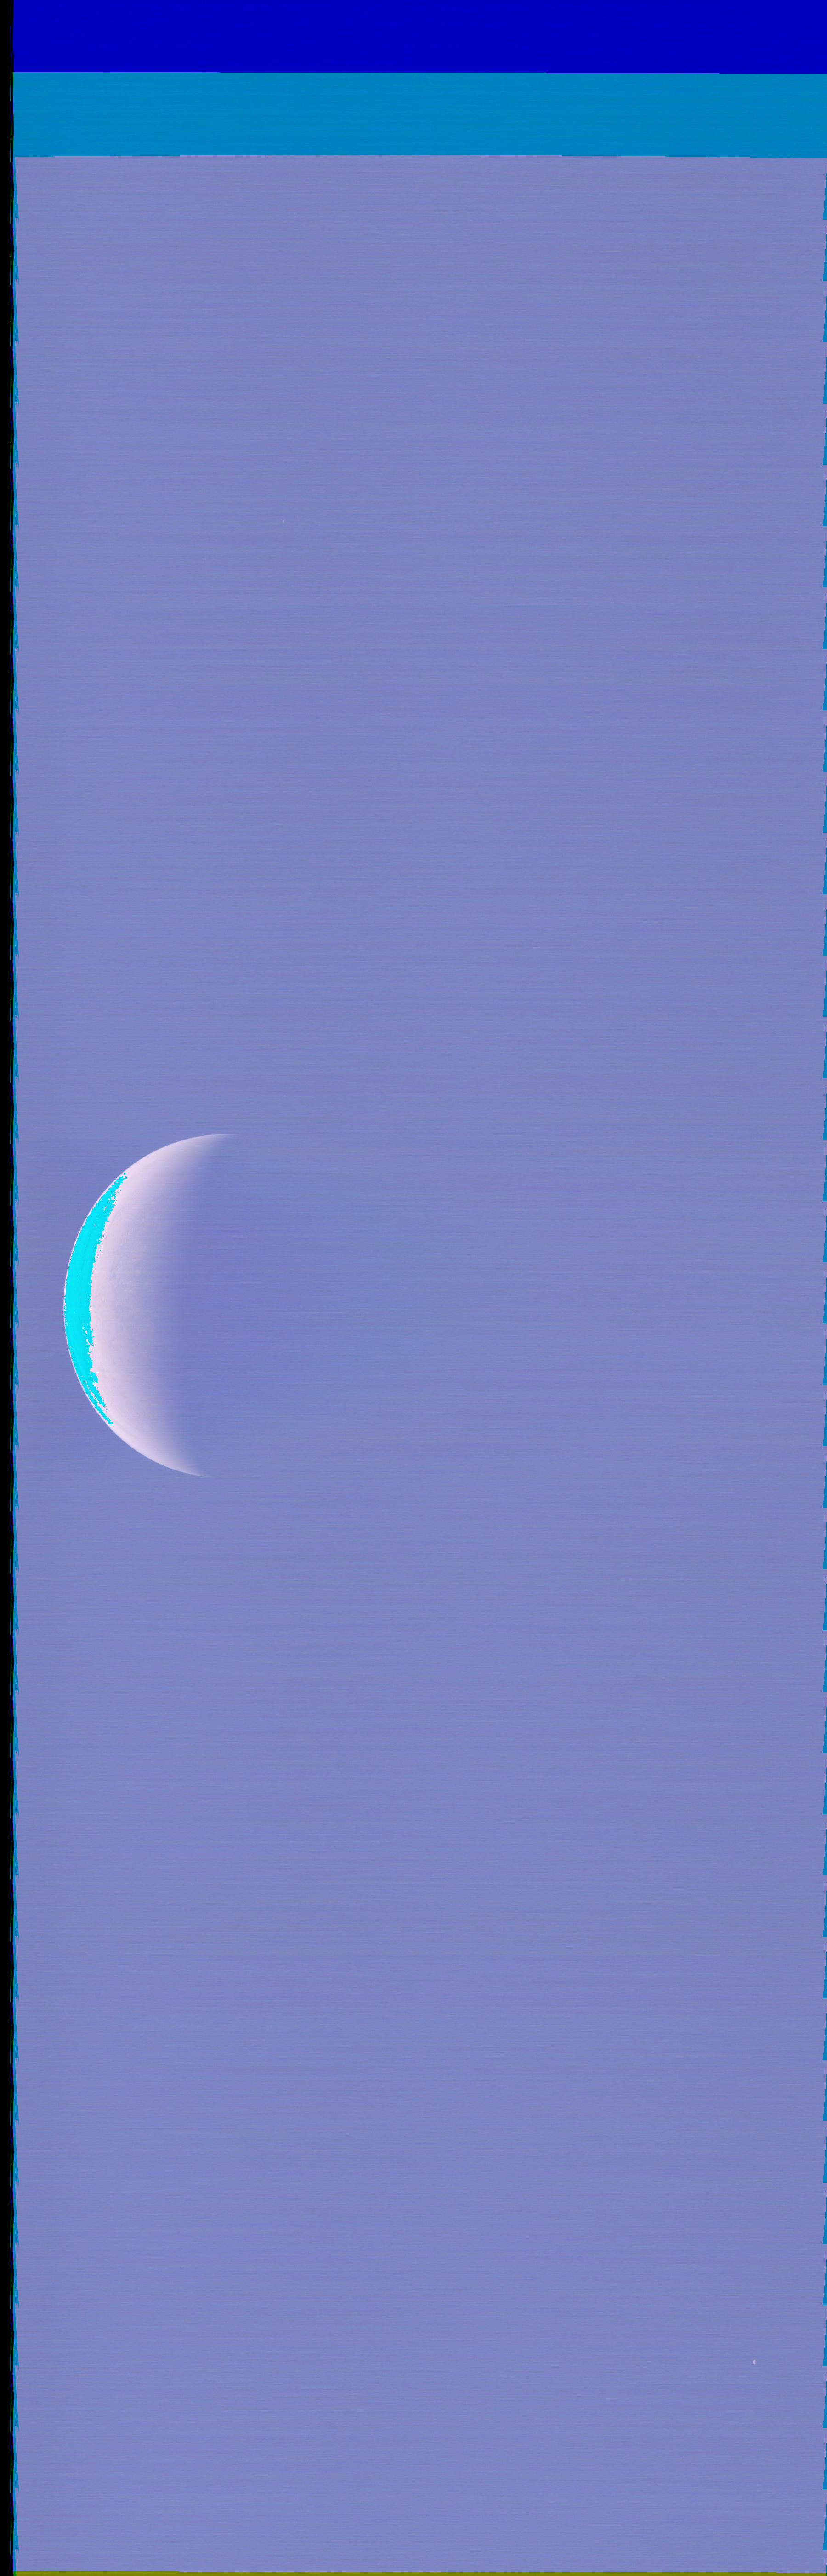 JNCE_2023326_56C00191_V01-raw_proc_hollow_sphere_c_pj_out.BMP_thumbnail_.png